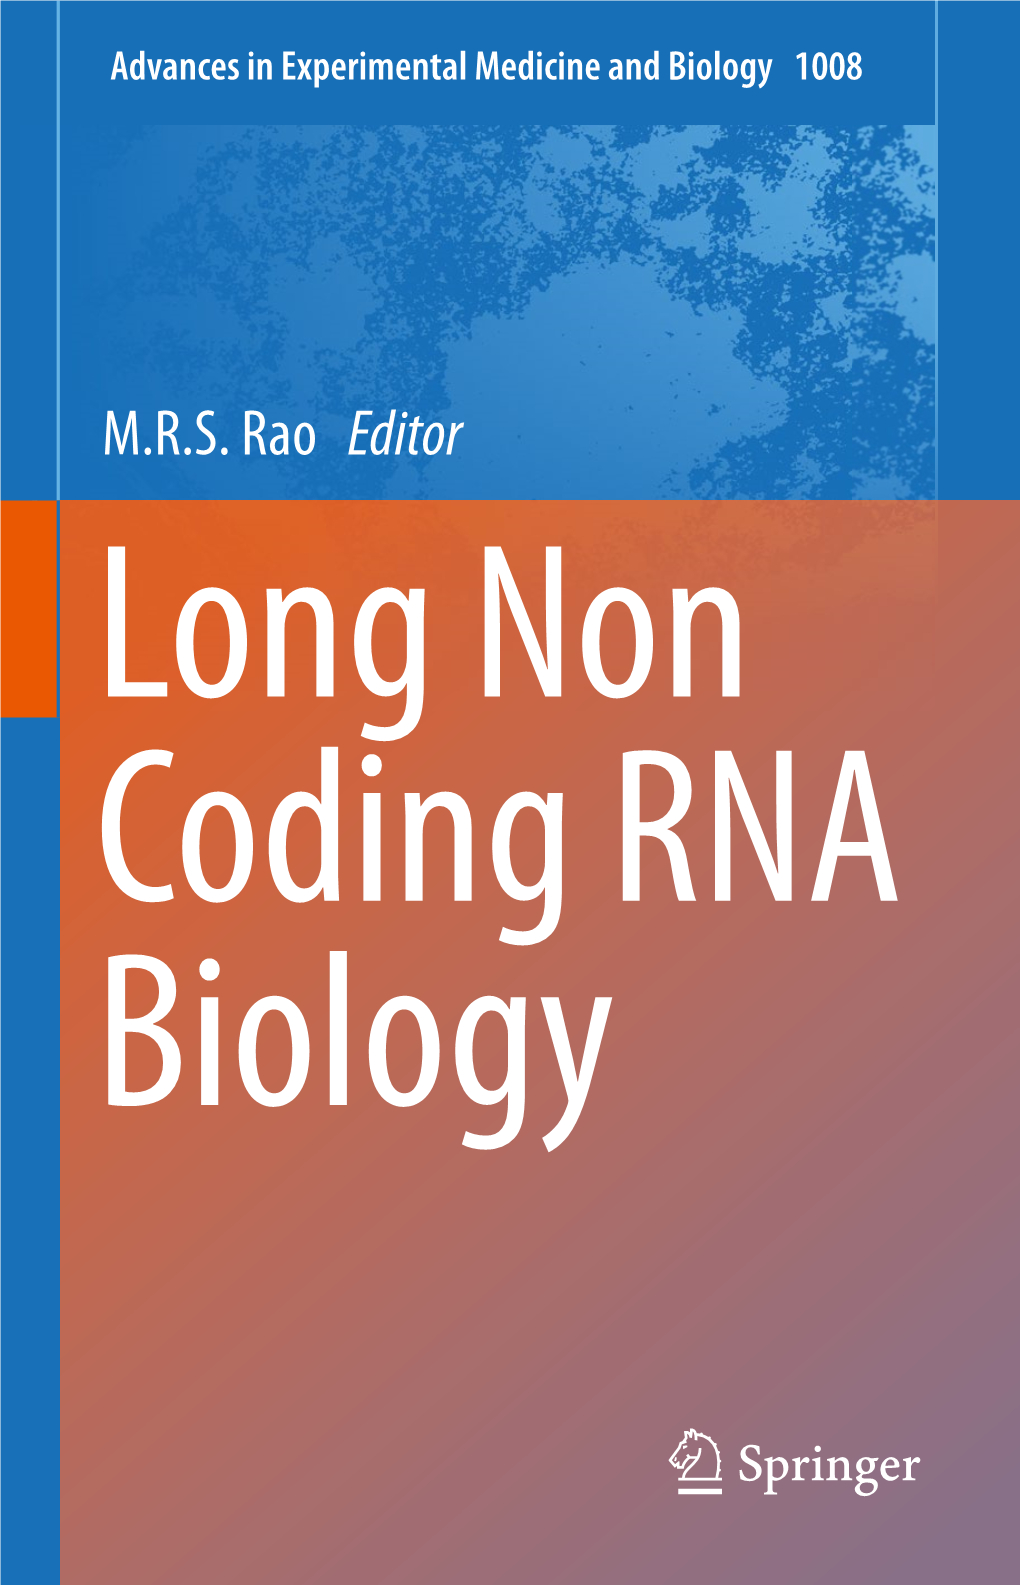 M.R.S. Rao Editor Long Non Coding RNA Biology Advances in Experimental Medicine and Biology Volume 1008